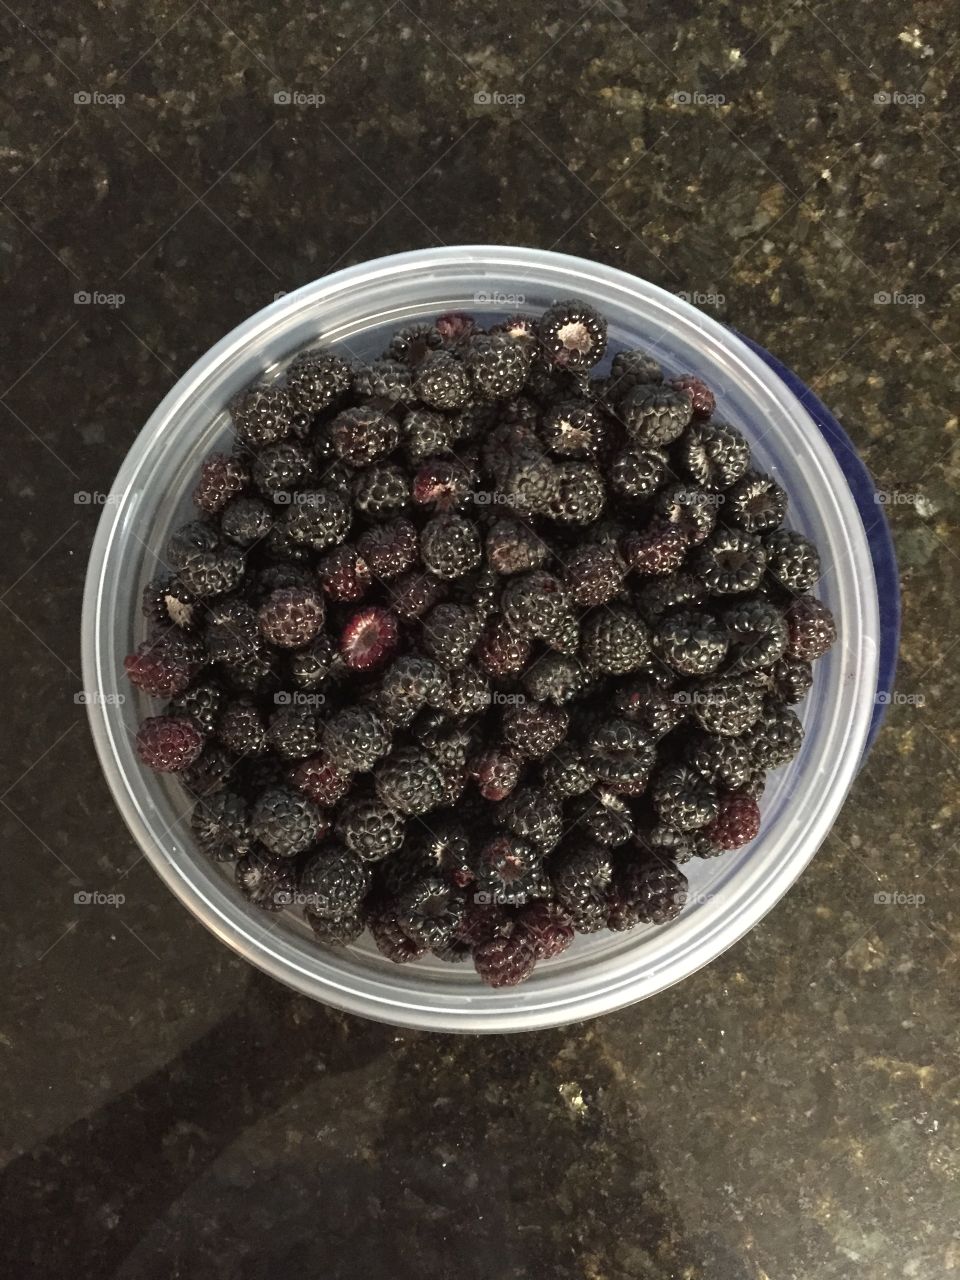 Fresh picked berries. My fingers are blue now. 